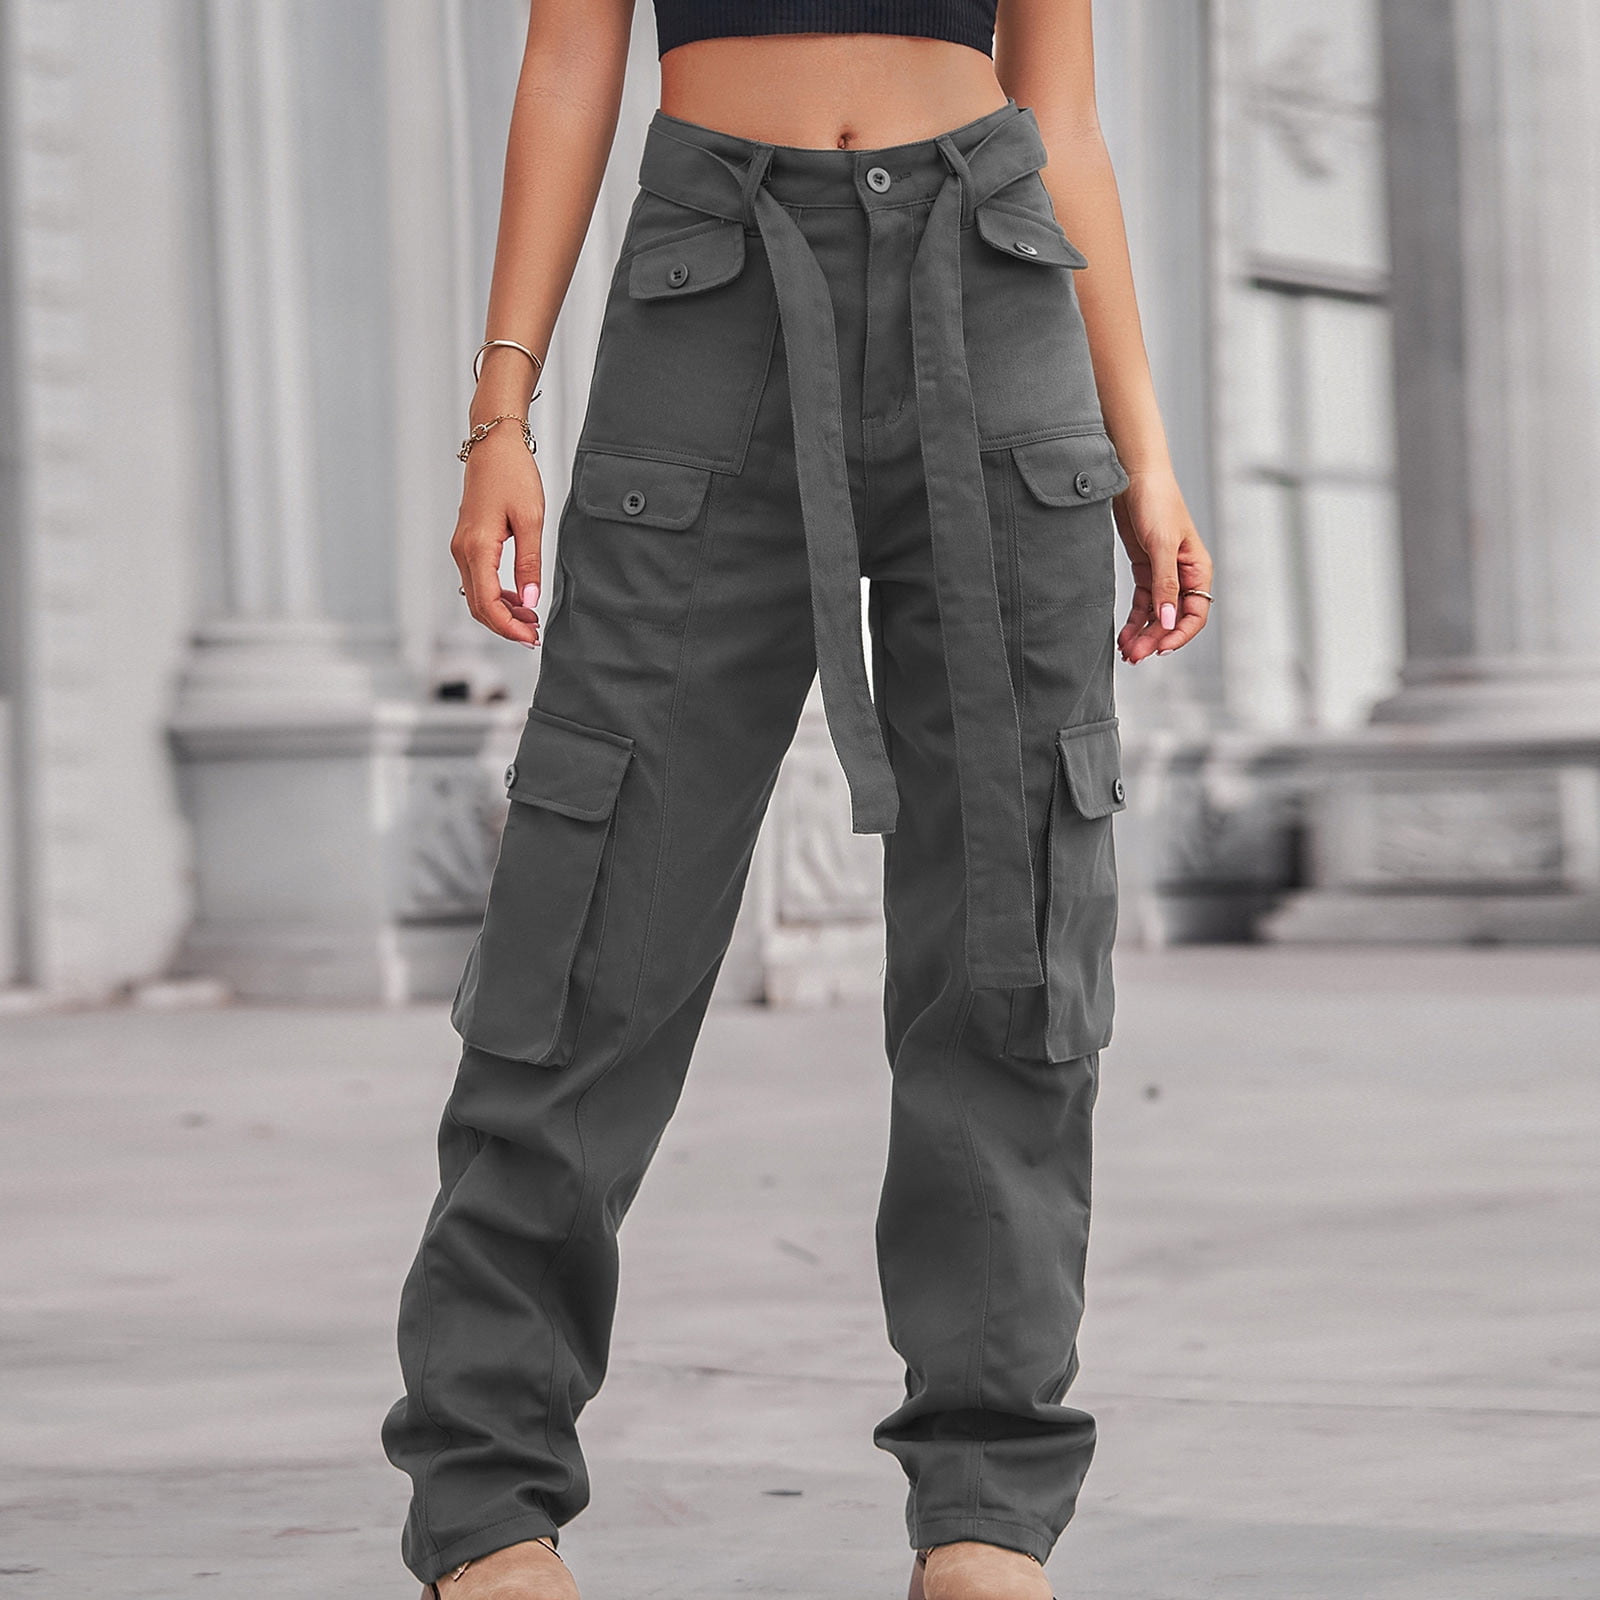 SELONE Cargo Pants Women With Pockets Denim Casual Long Pant Straight Leg  Solid Pants Hippie Punk Trousers Jogger Loose Overalls s for Everyday Wear  Running Errands Going to Work Casual Event Black